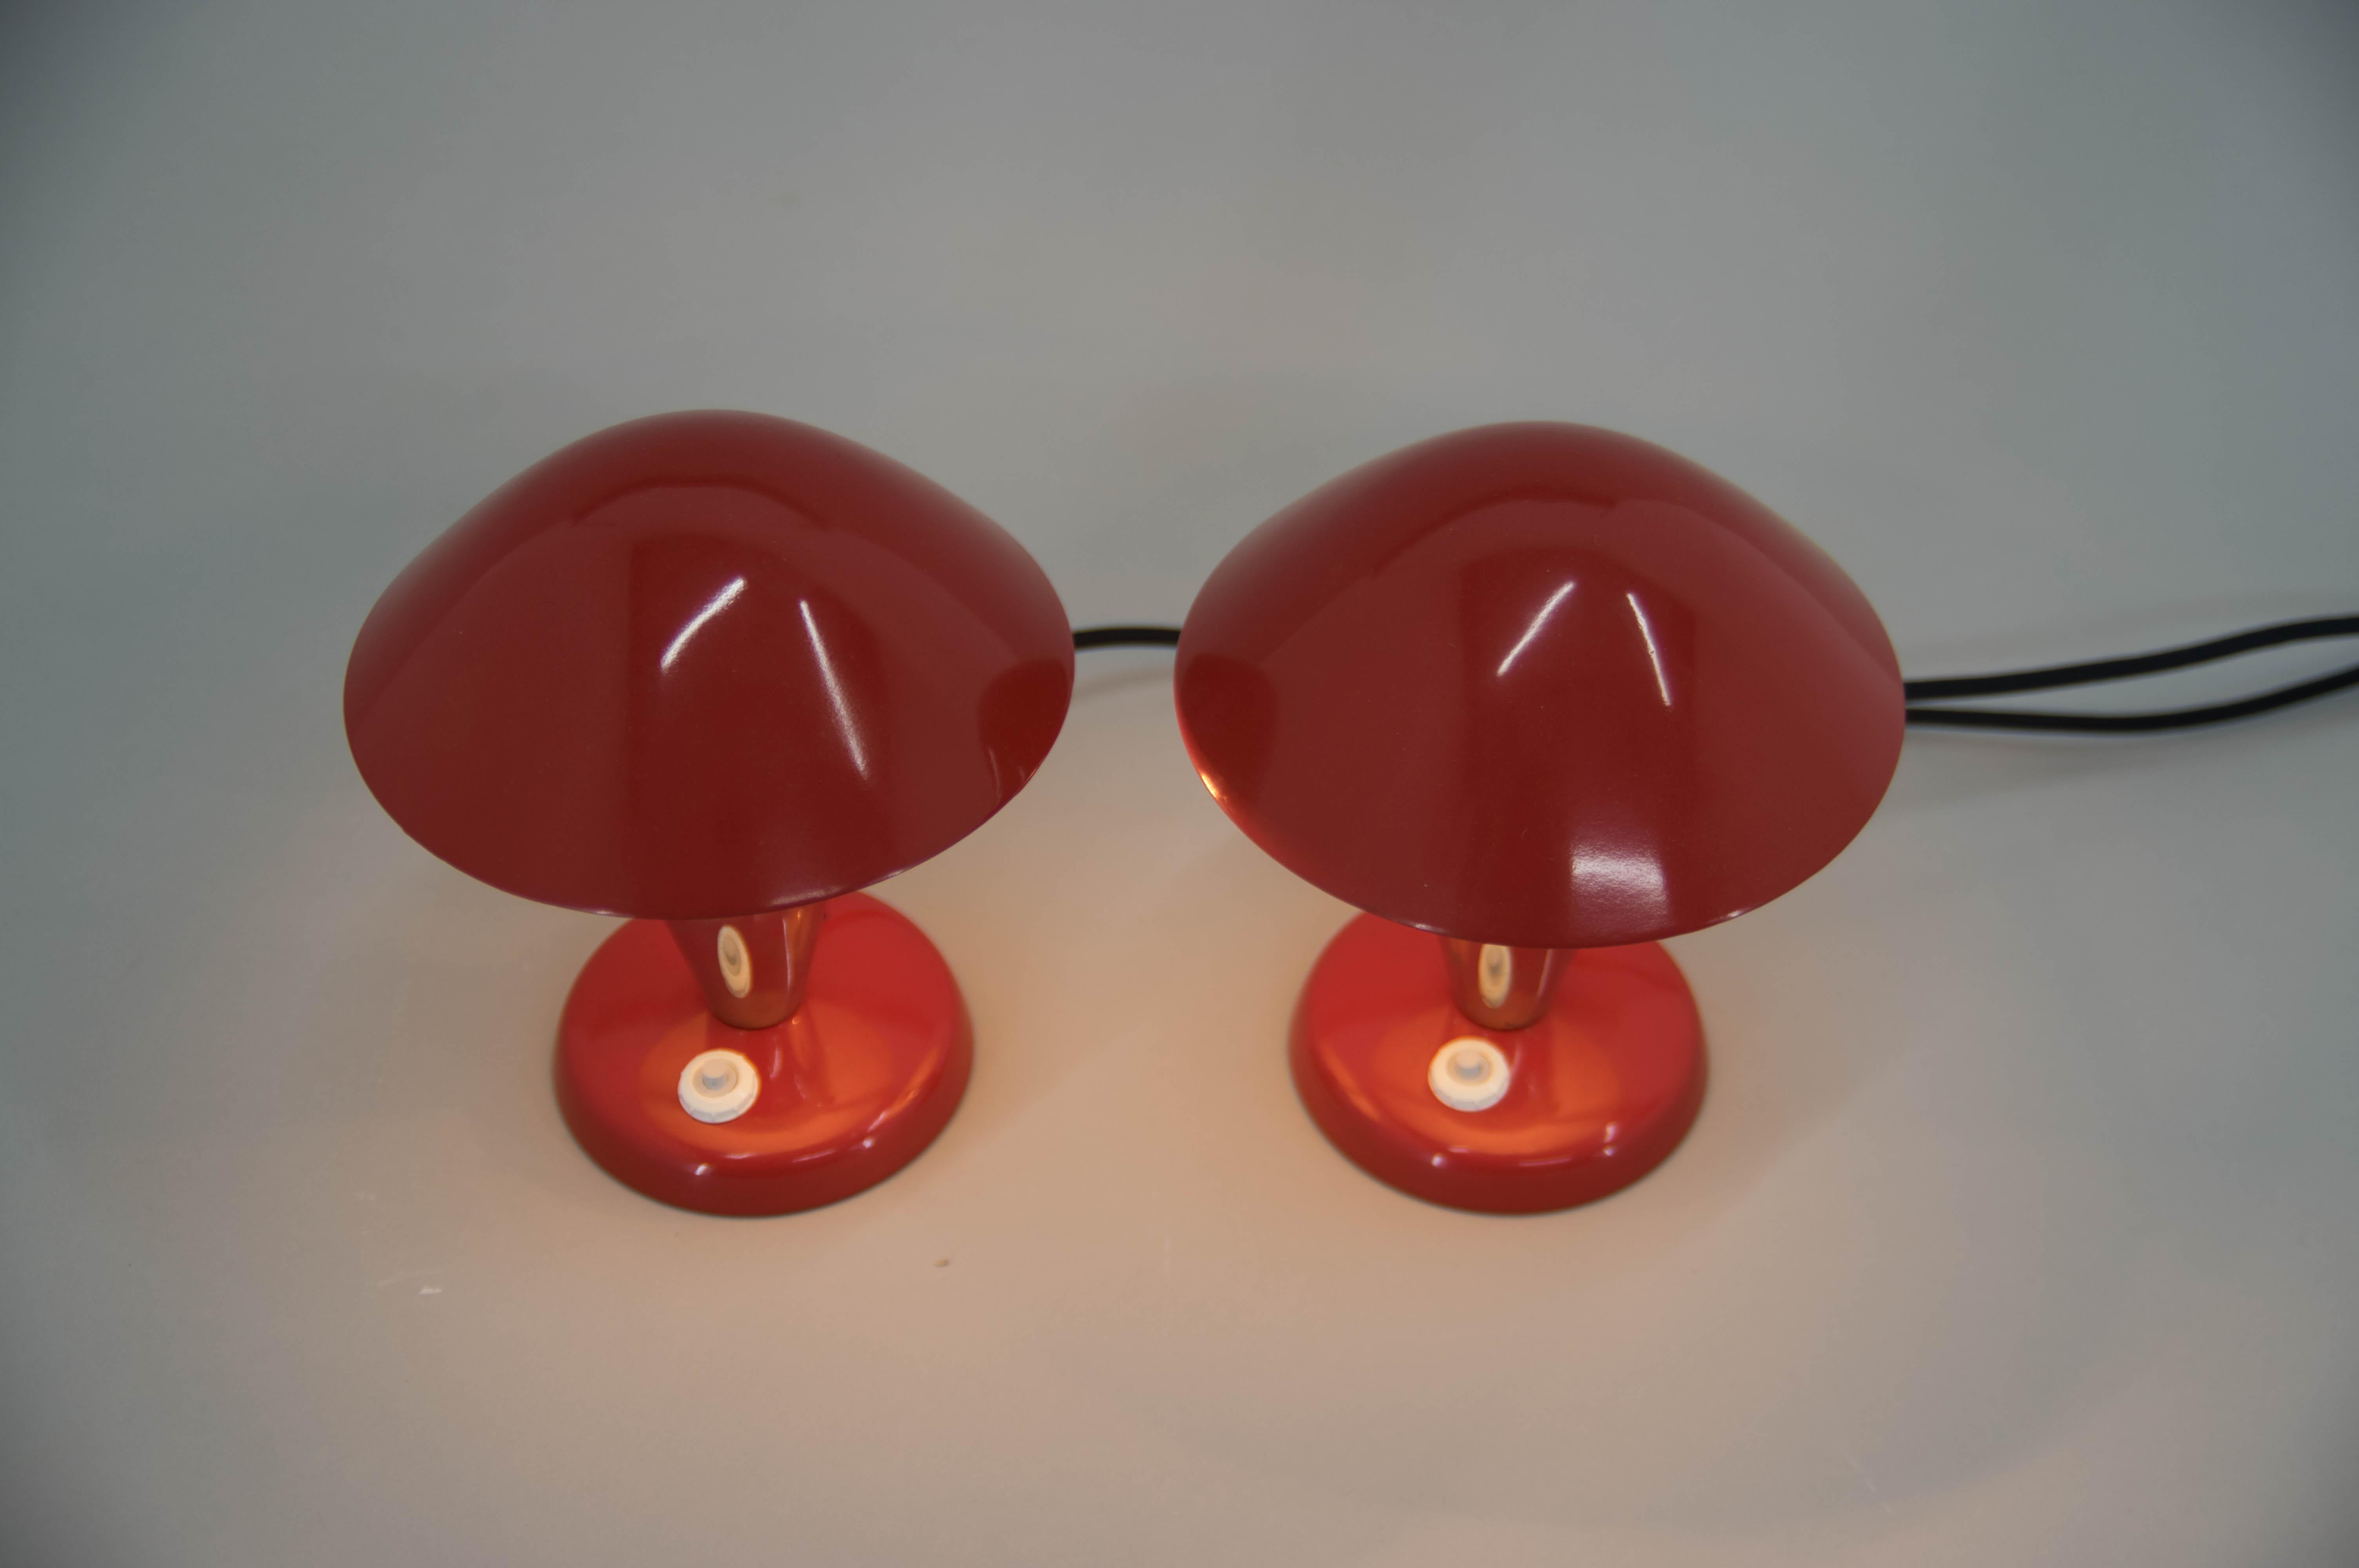 Czech Pair of Bauhaus Bedside Lamps with Flexible Shade, 1930s, Restored For Sale